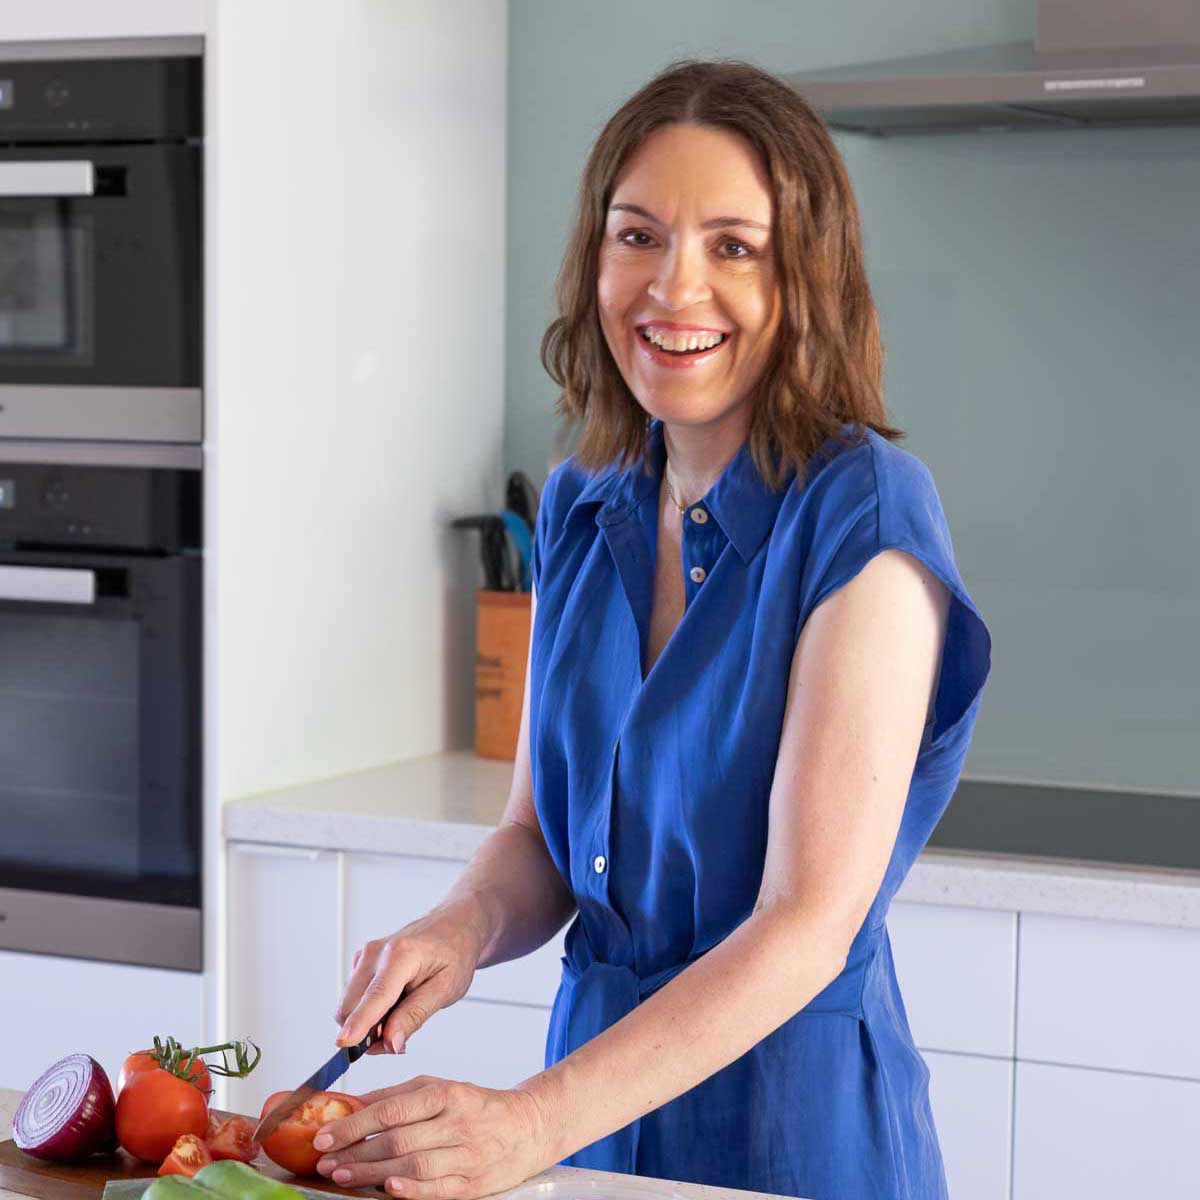 A square image of Helen Schofield, owner of food blog Scrummy Lane, standing at her bench in the kitchen smiling and wearing a blue dress and chopping vegetables.